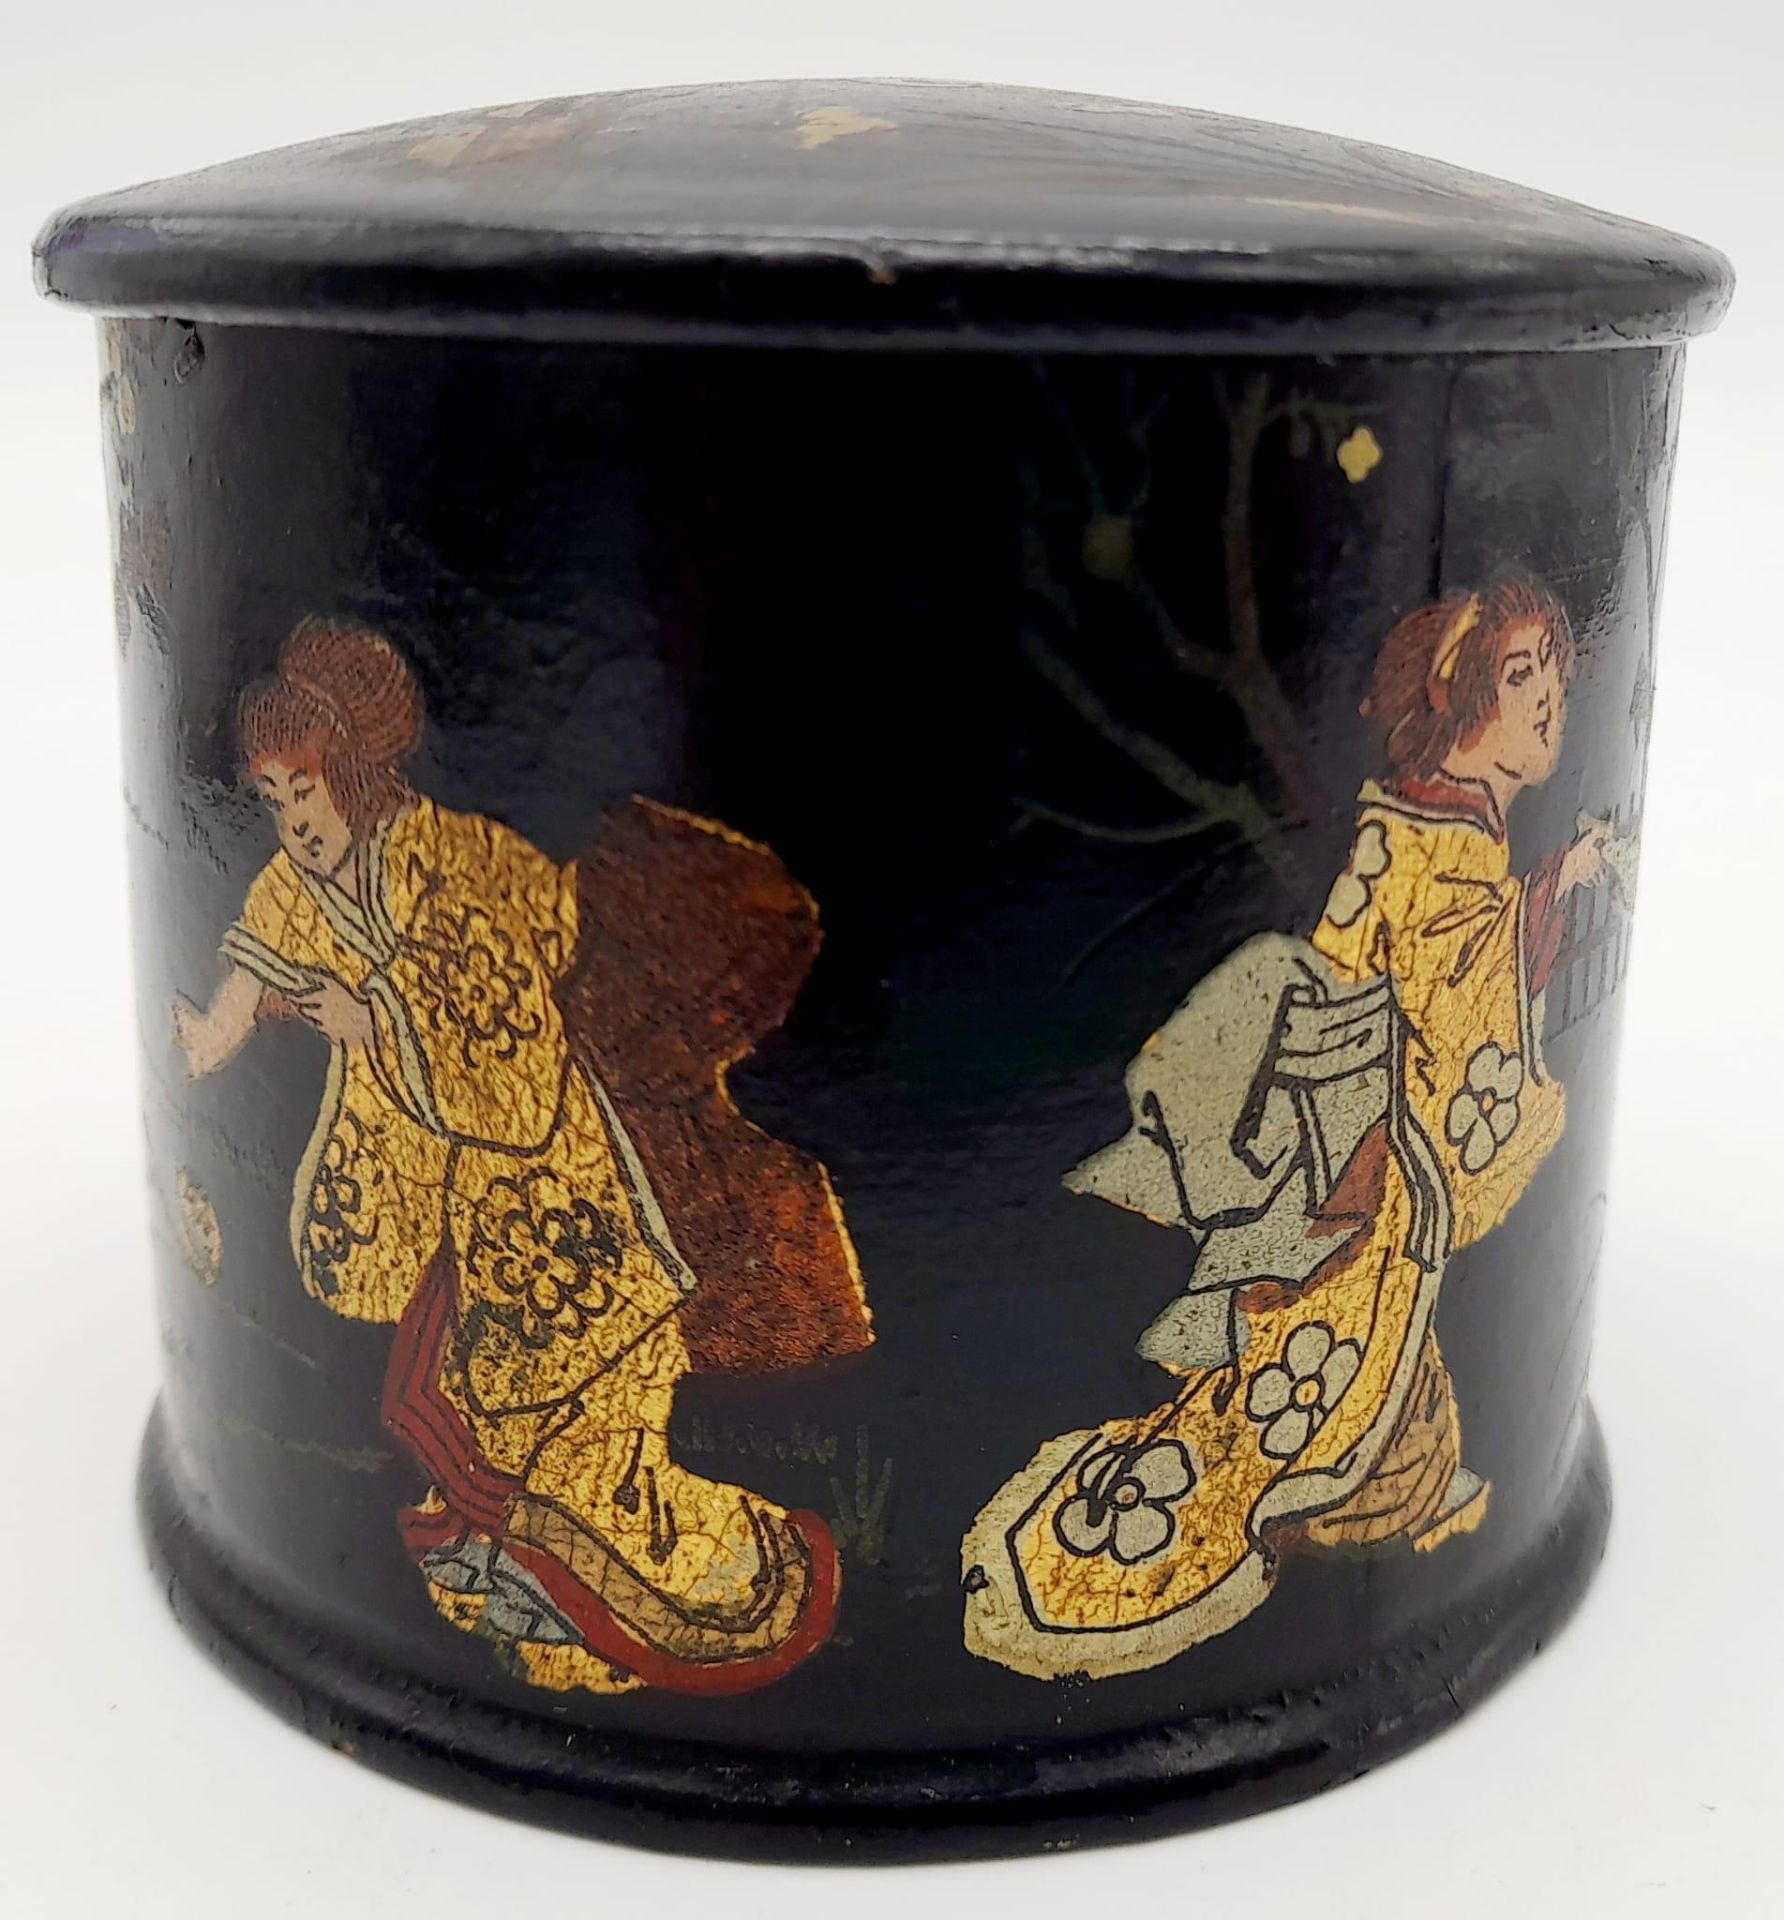 An Antique Chinese Black Lacquer Box. Wonderful decoration with gold on black depicting Mothers at - Image 6 of 13